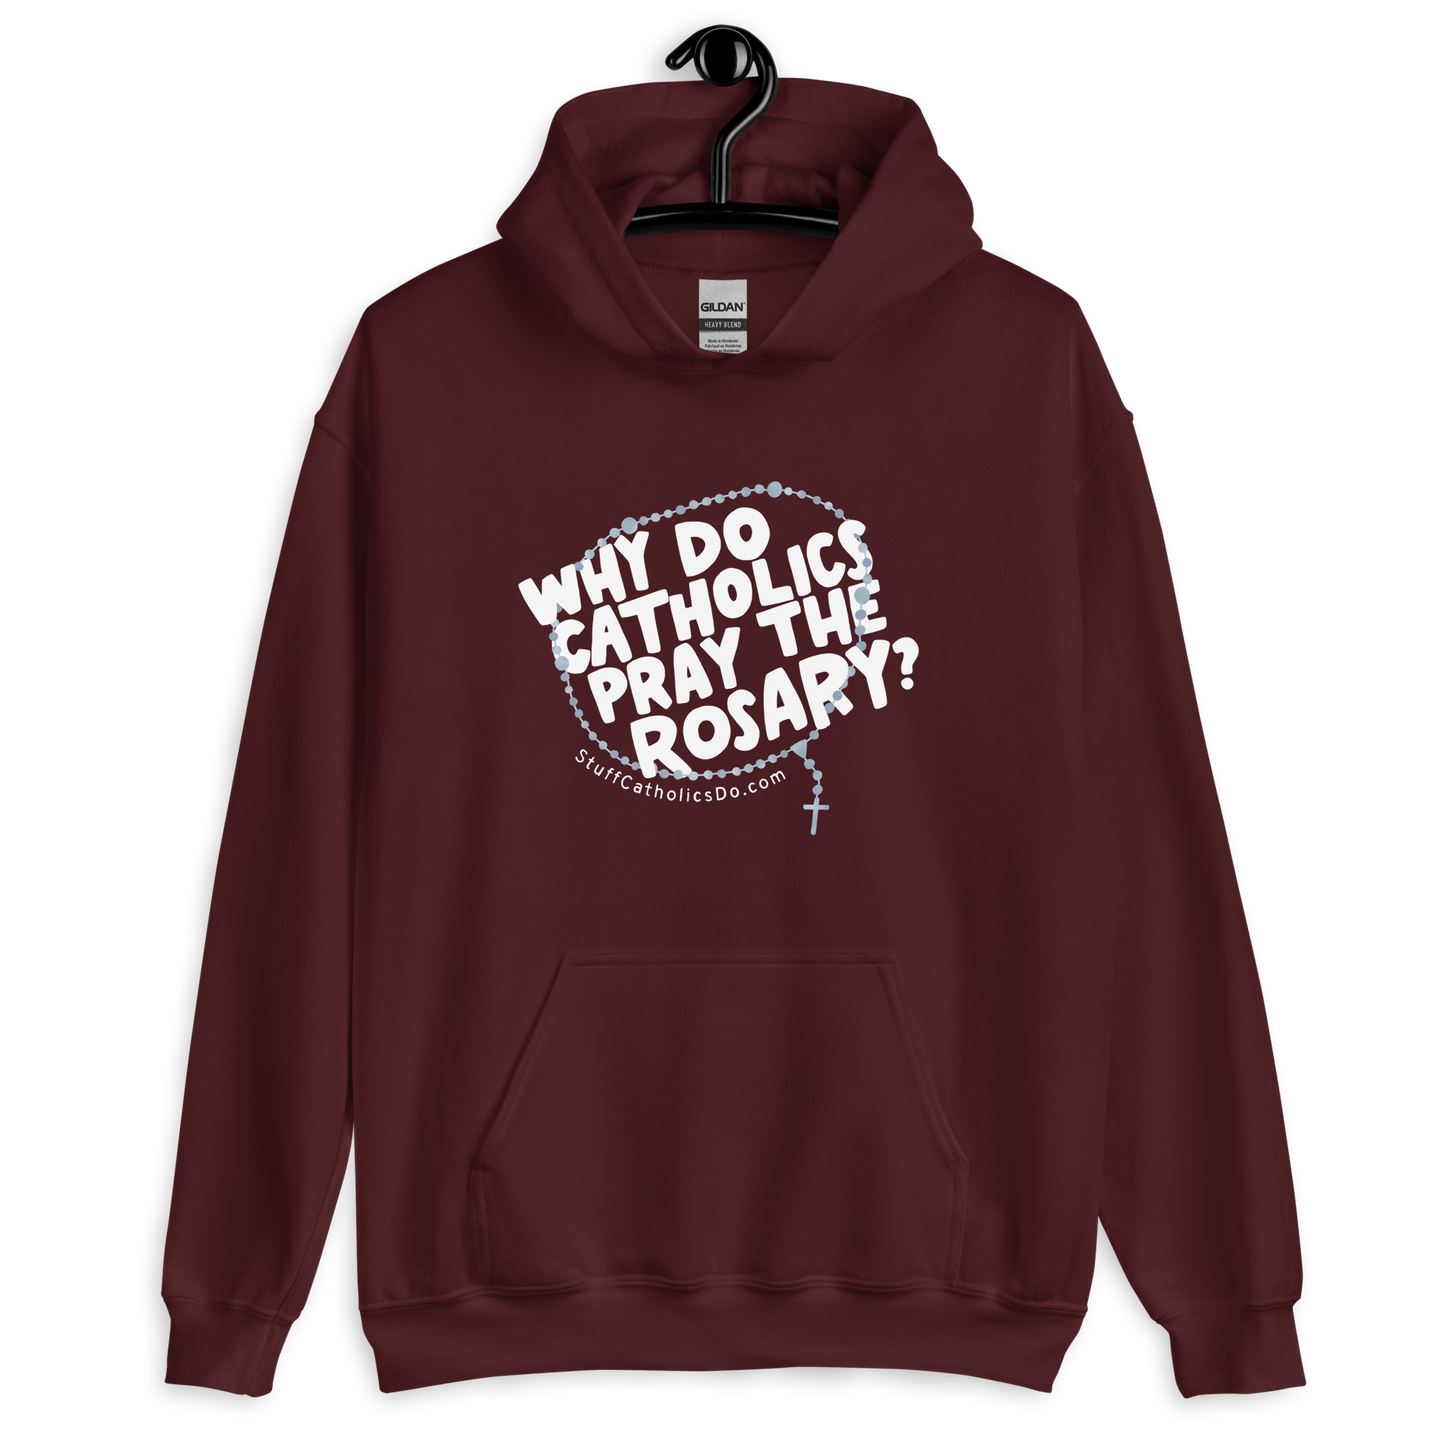 "Why Do Catholics Pray the Rosary?" Hoodie - Front Only